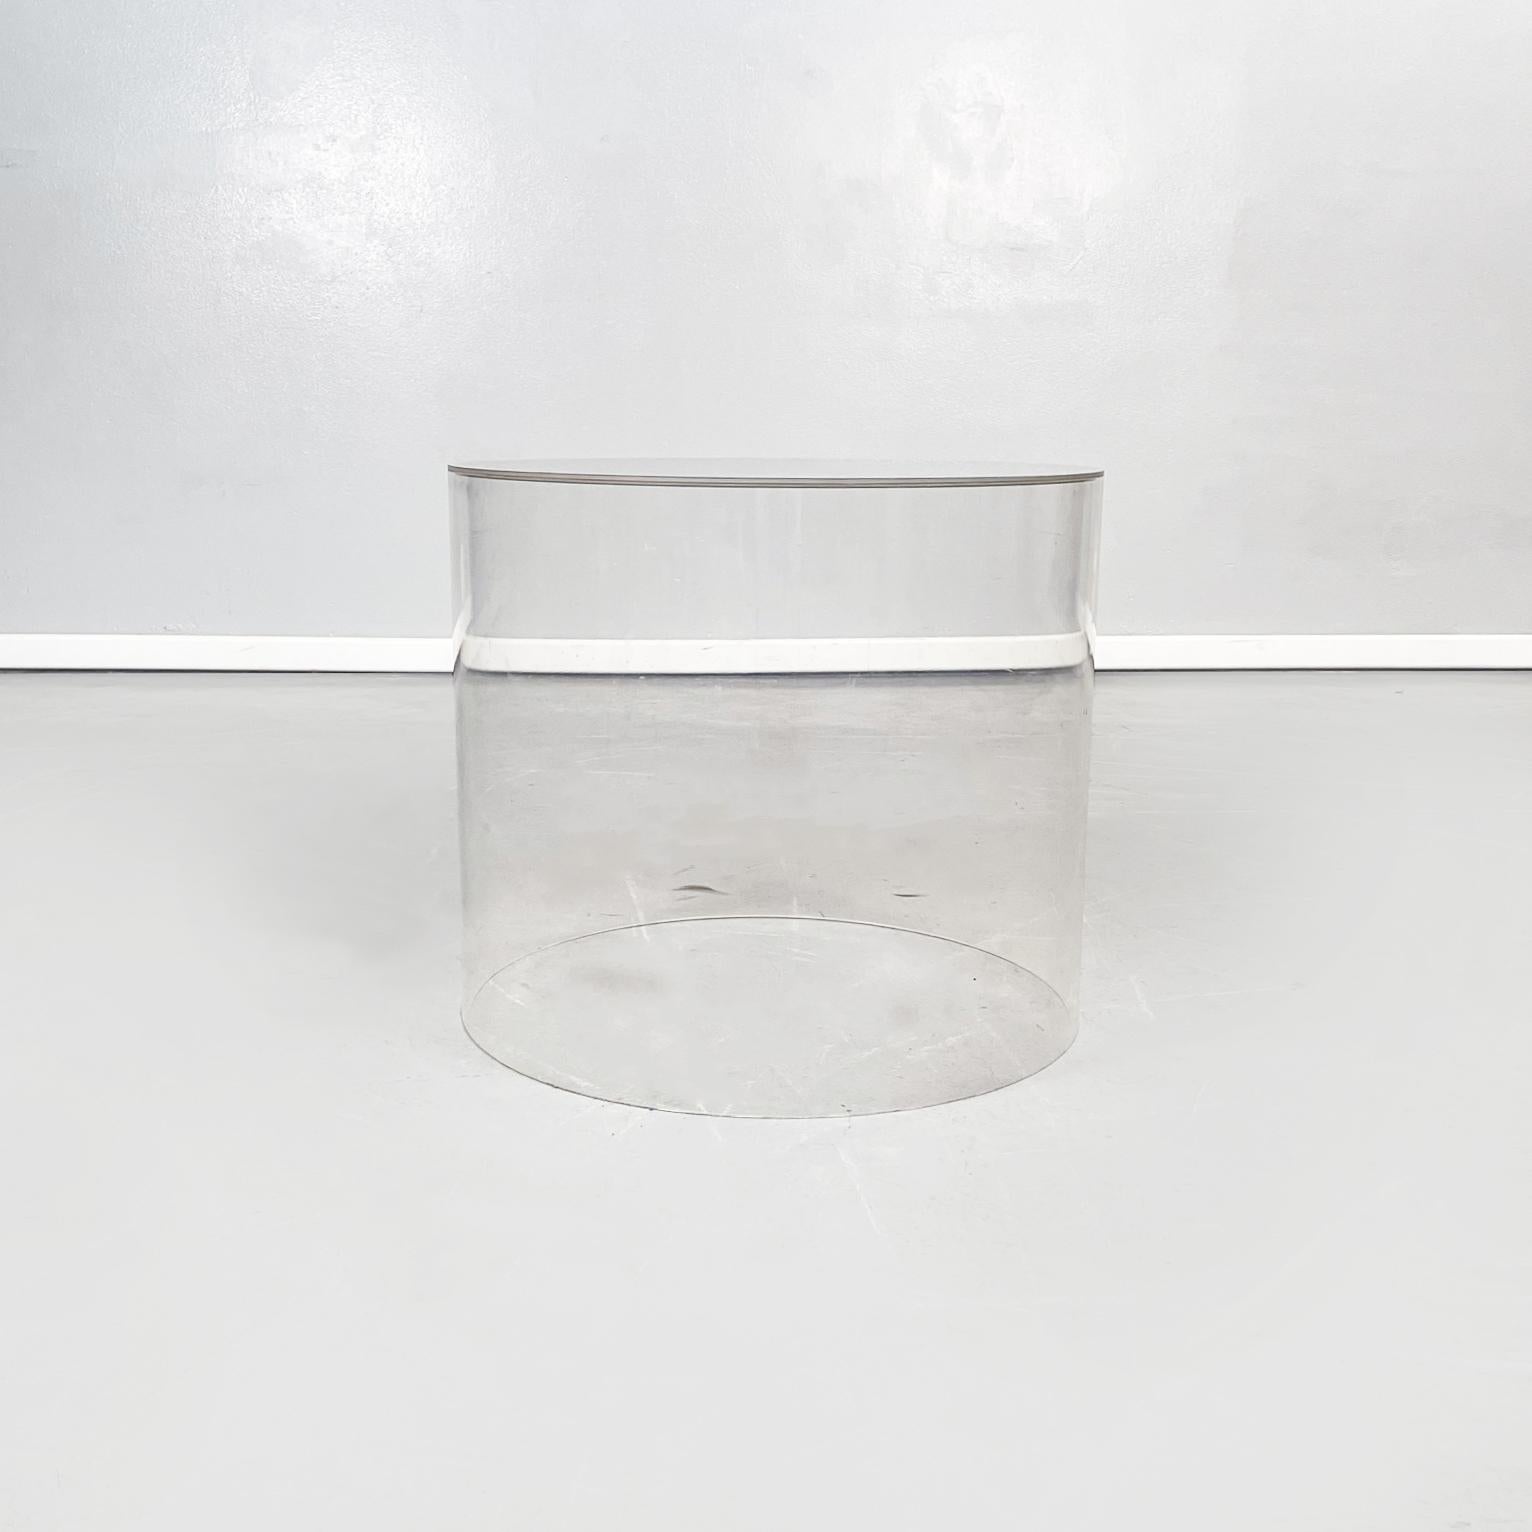 Italian Post-Modern Cylindrical Coffee Tables in Grey and Blue Plexiglass, 2000s For Sale 2